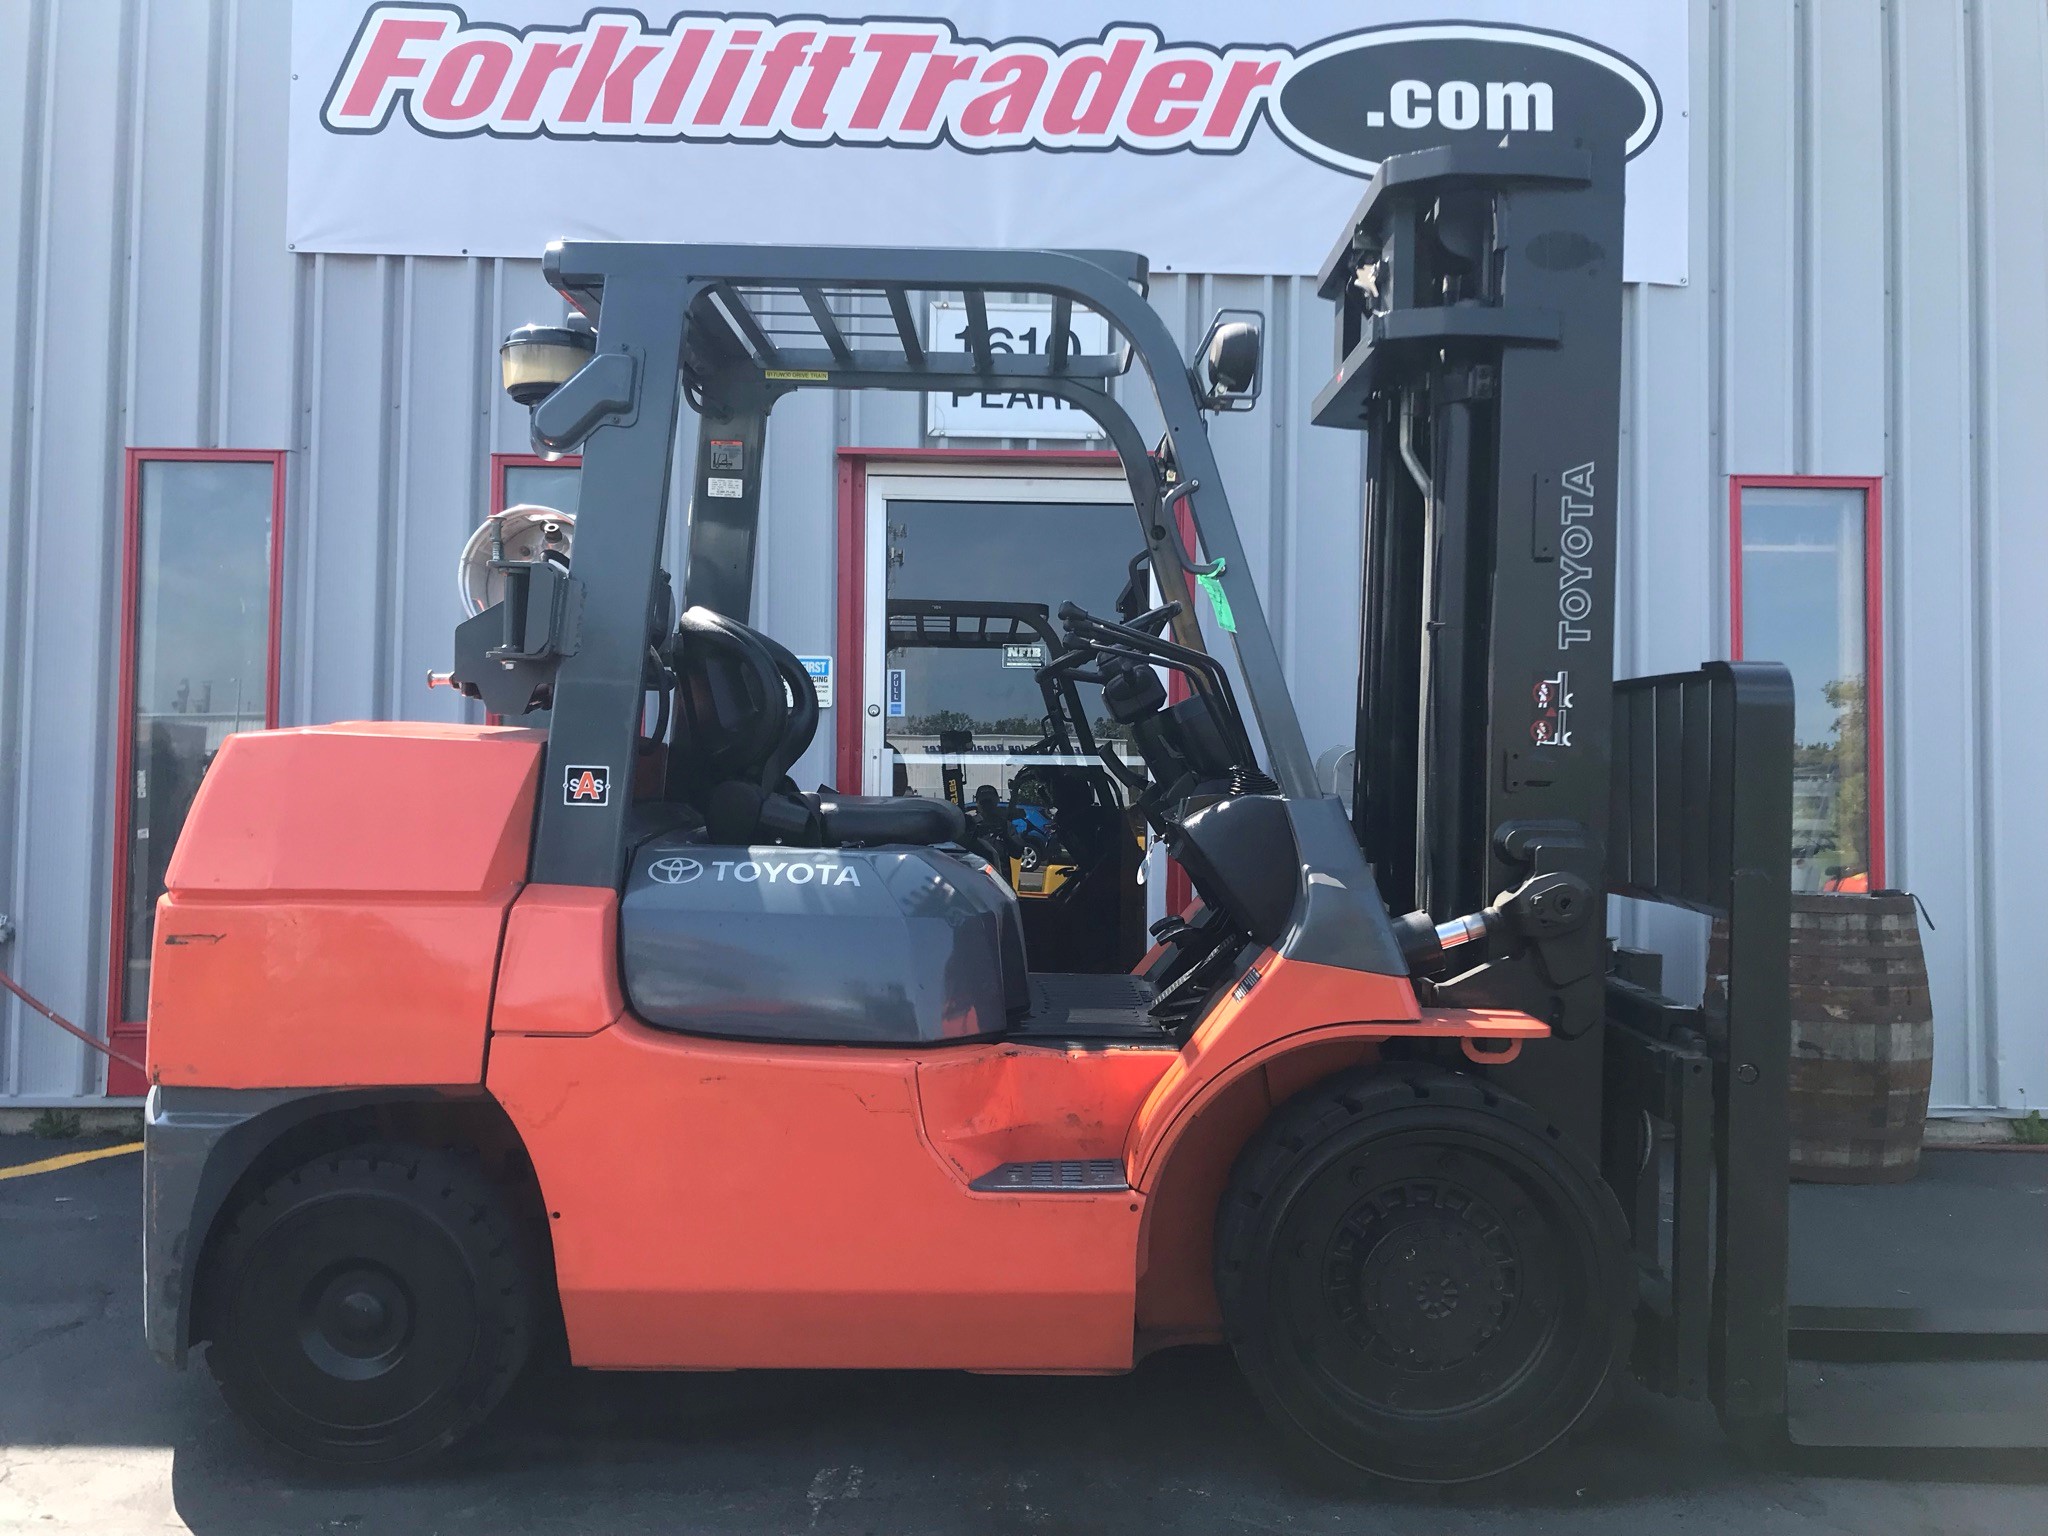 Cushion tires 2006 toyota forklift for sale